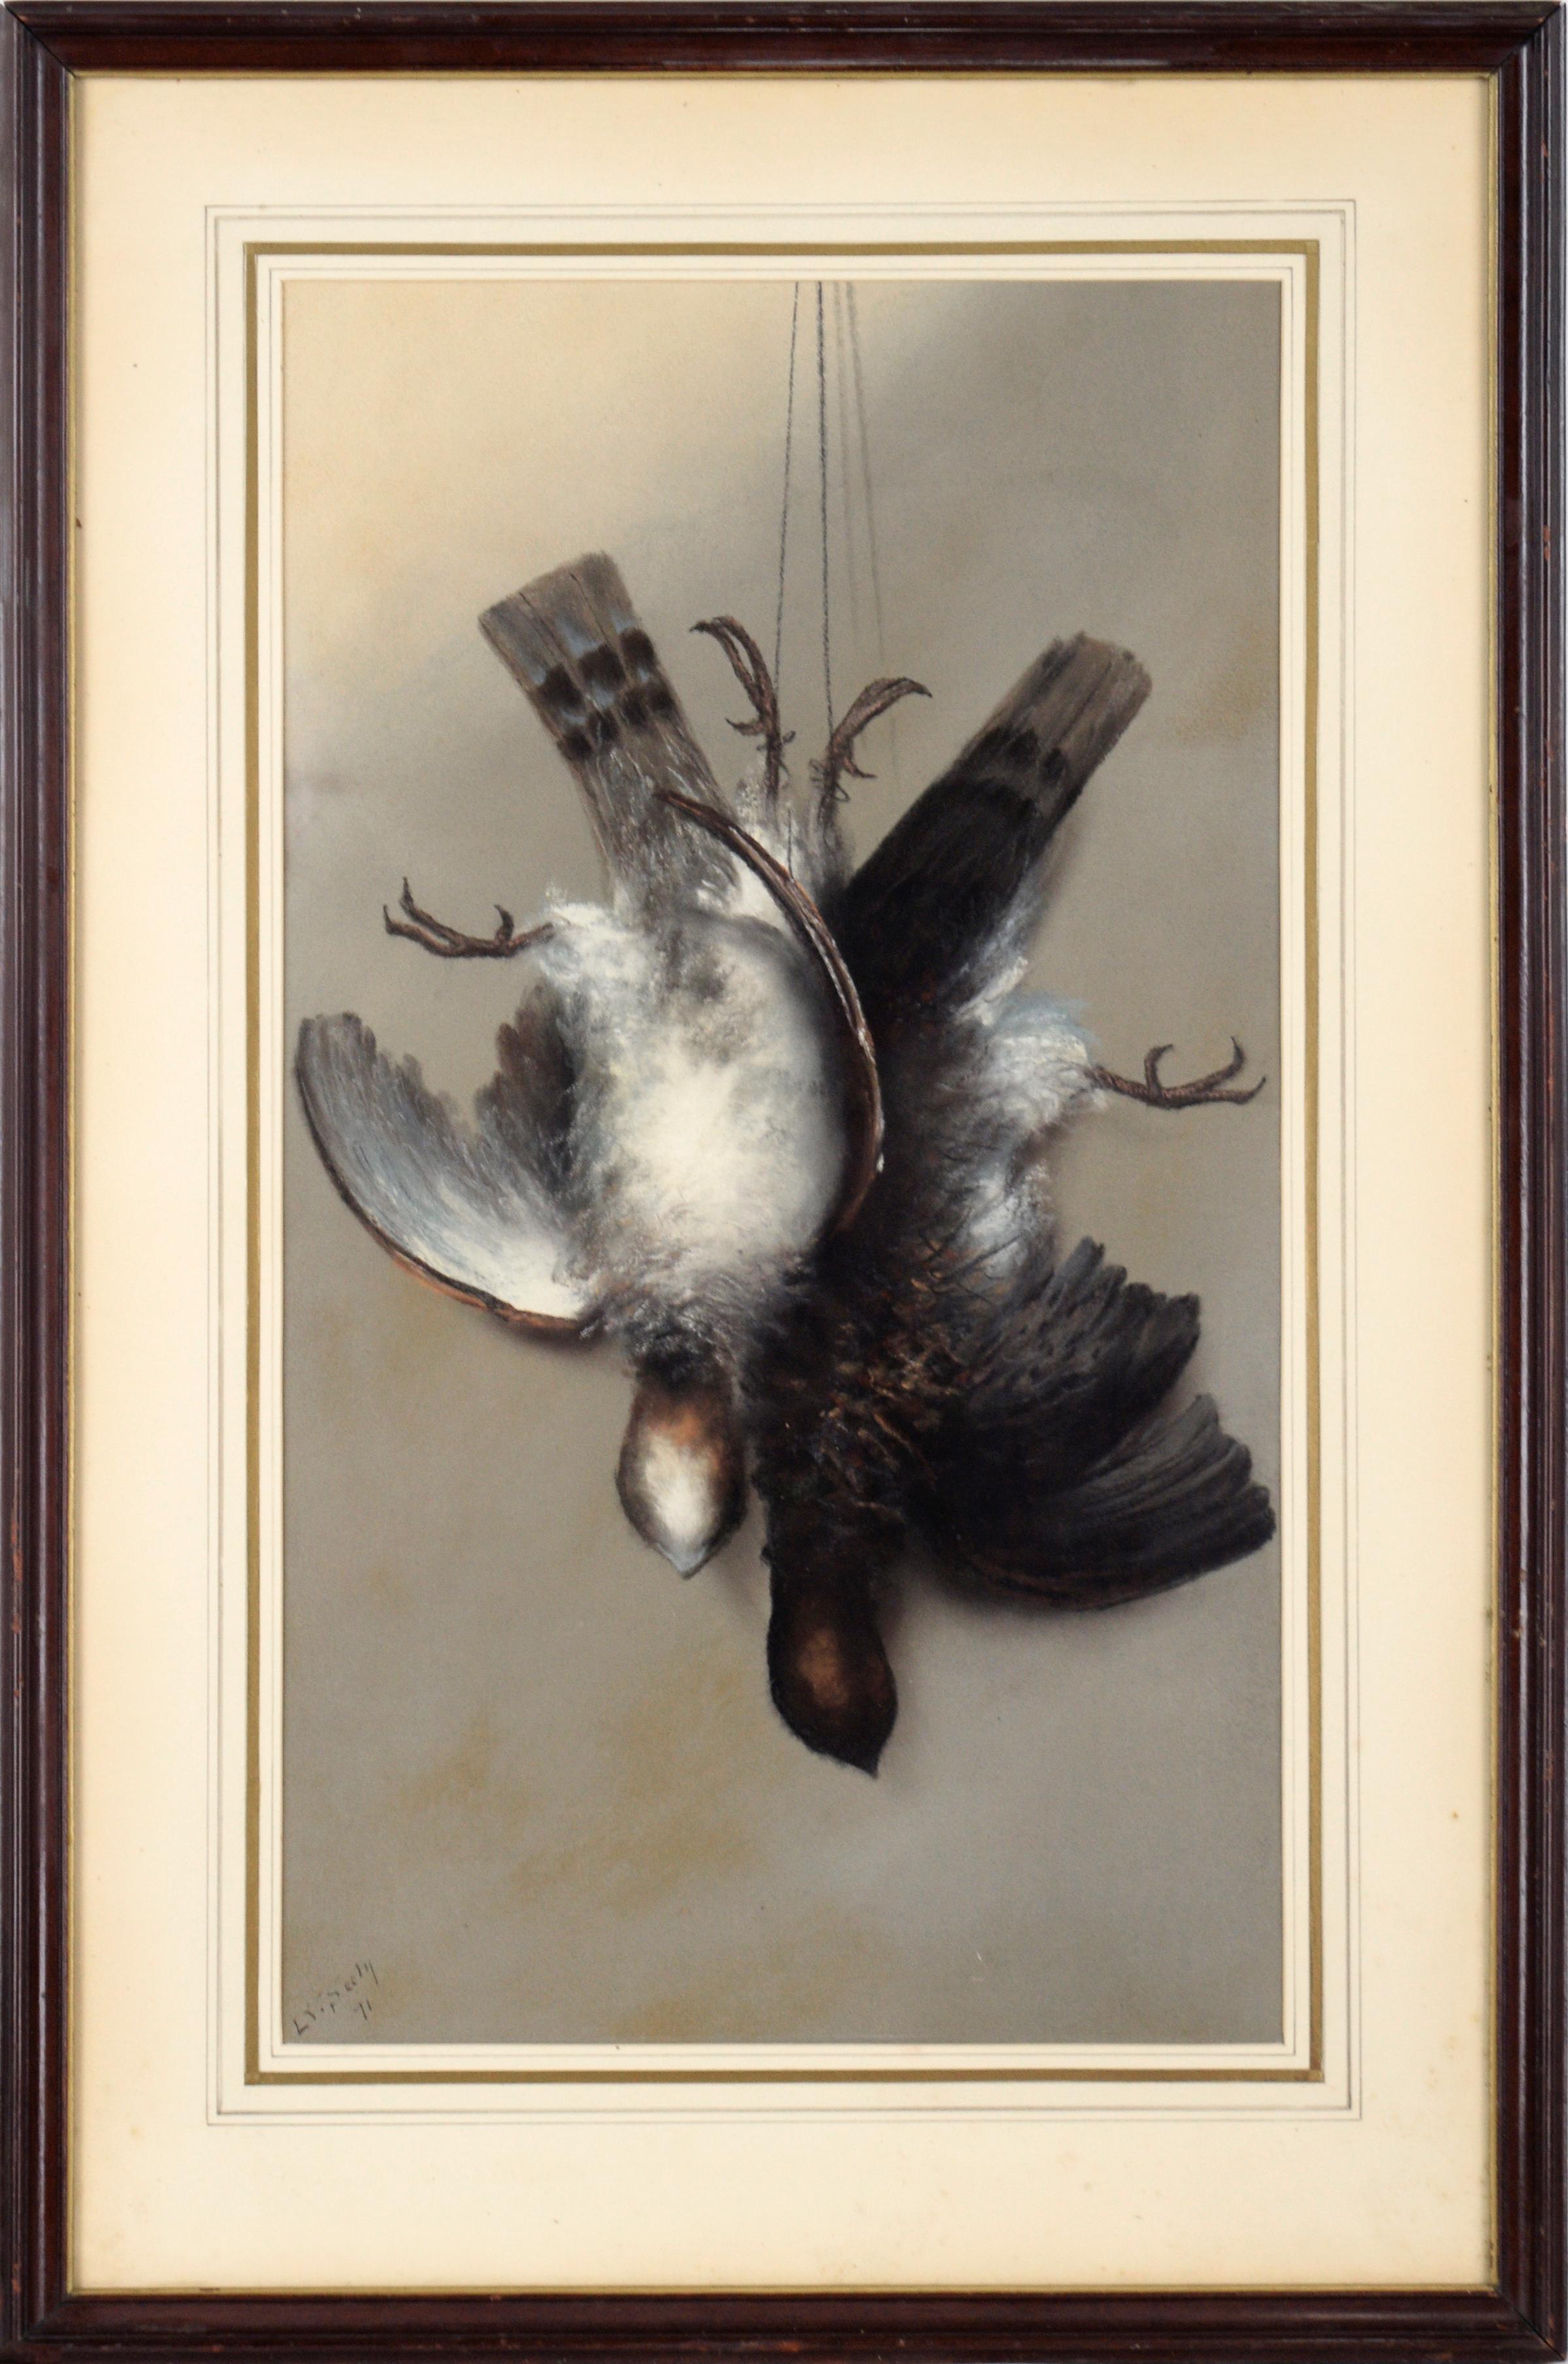 L V Seely Animal Art - Two Game Birds - Trompe l'Oeil Style in Pastel on Paper